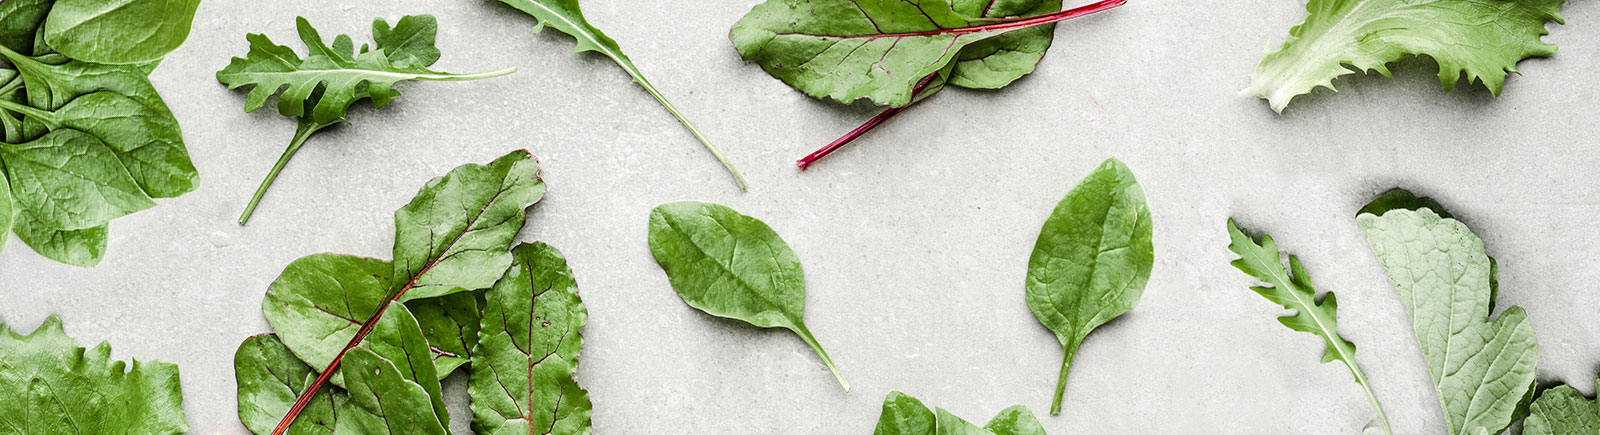 header image of leafy greens including spinach and lettuce